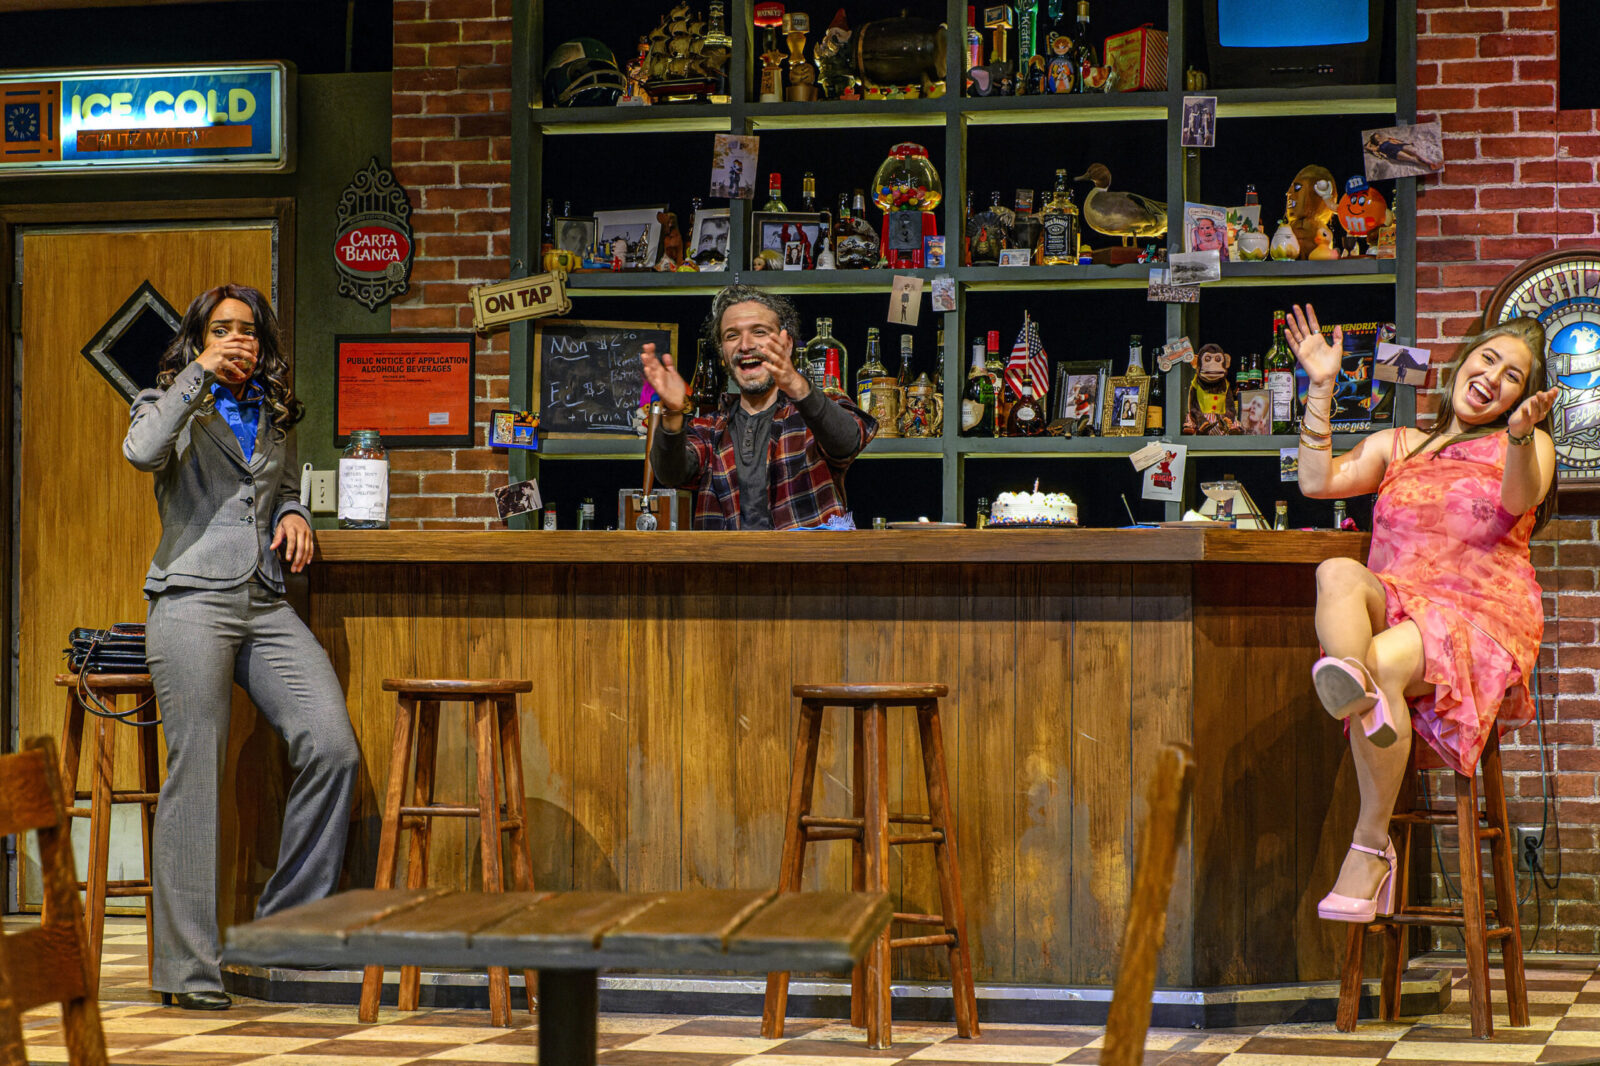 3 actors on stage at a large bar, looking like they are celebrating something